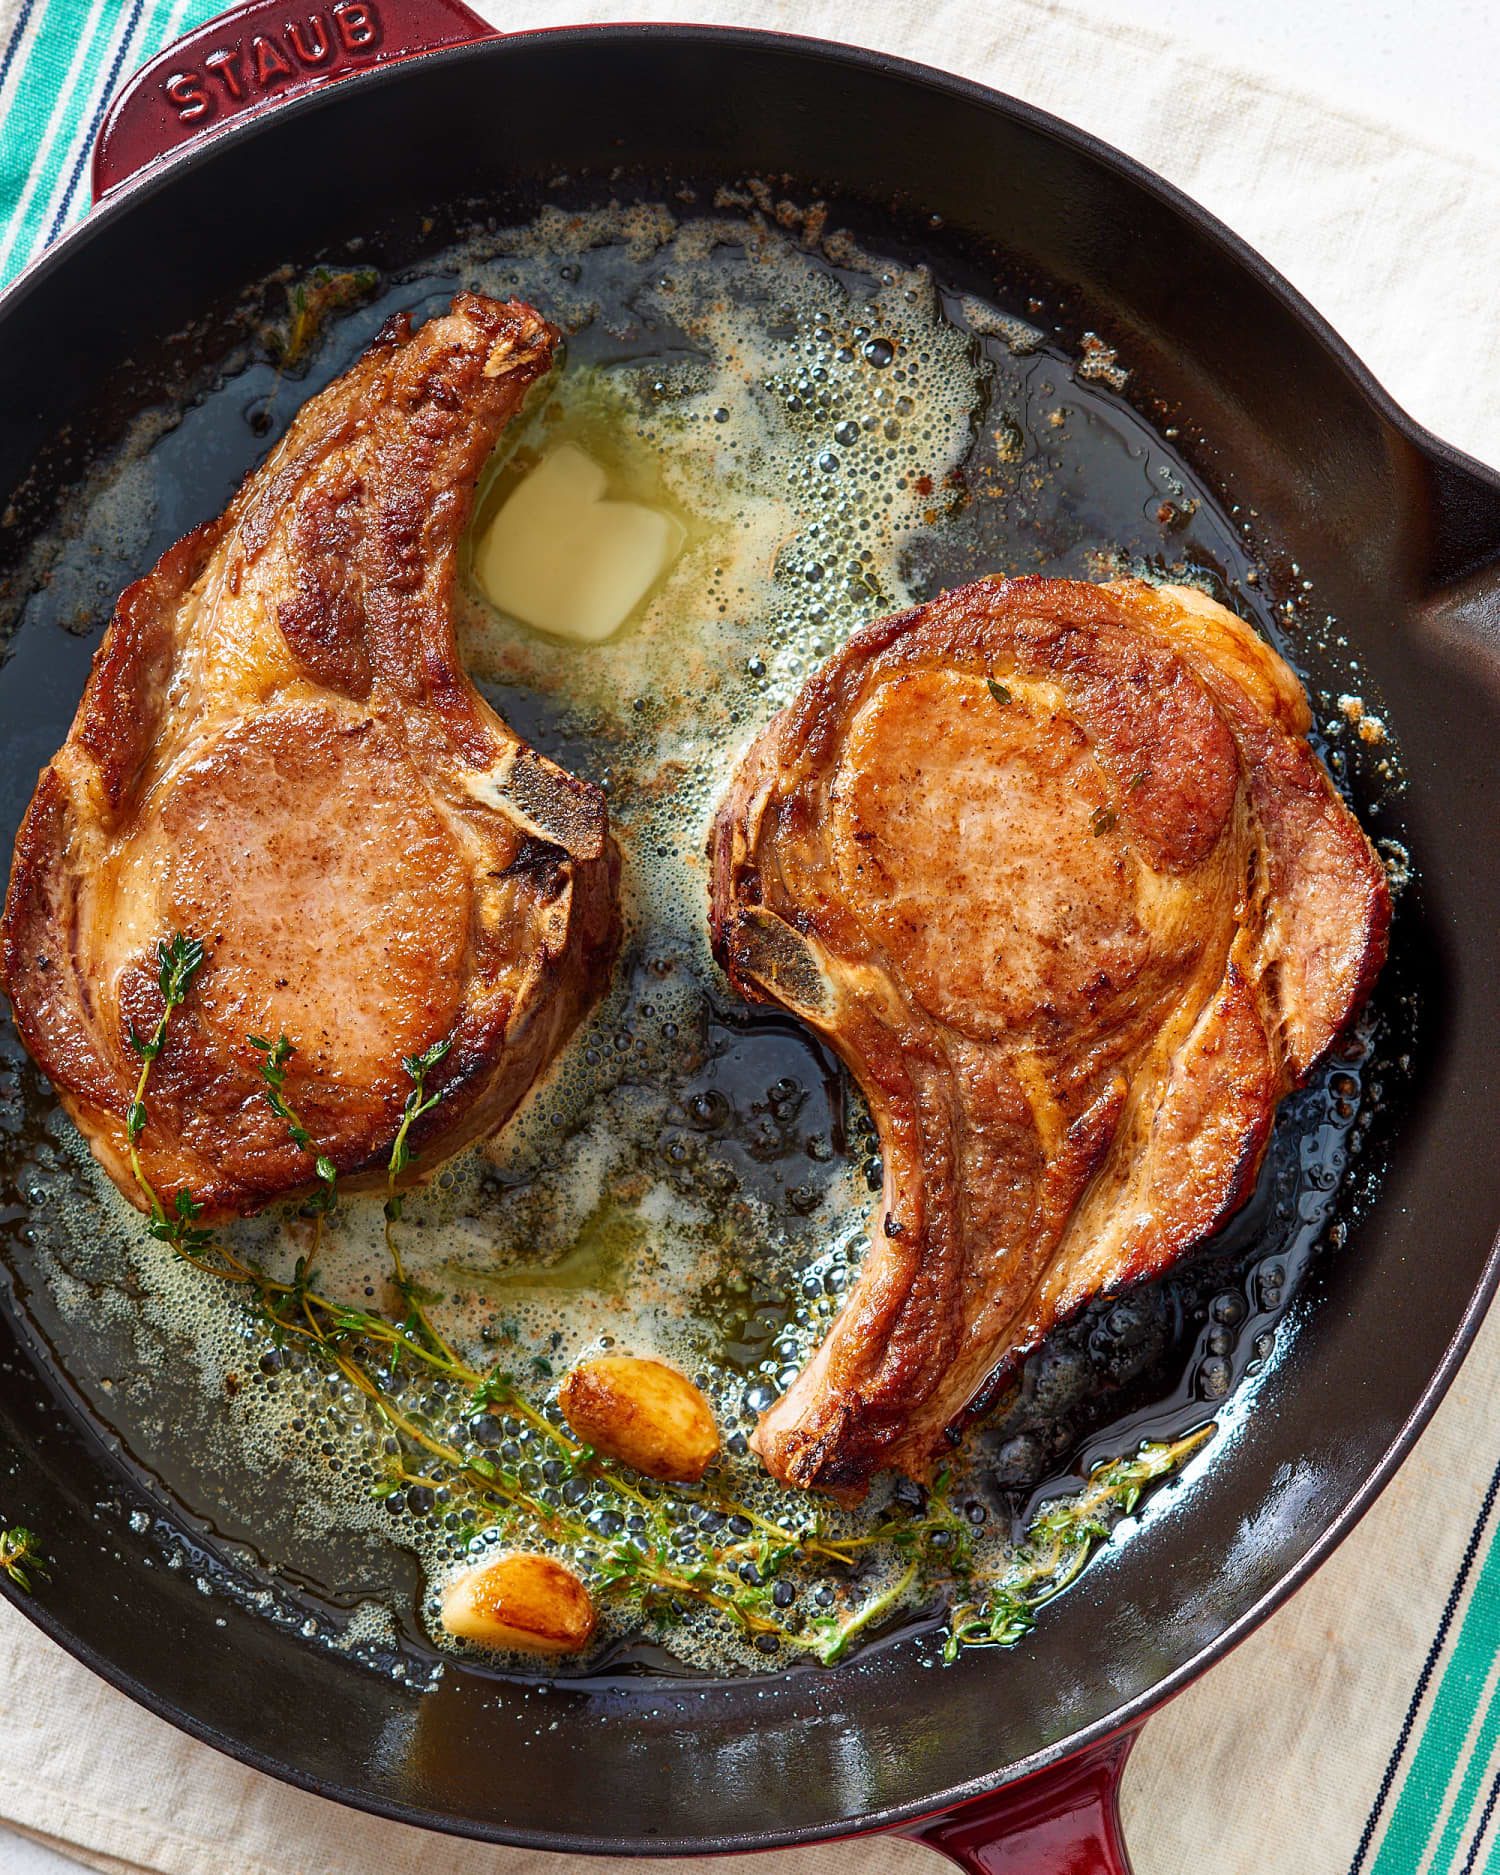 How To Make Easy Pan-Fried Pork Chops on the Stove | Kitchn